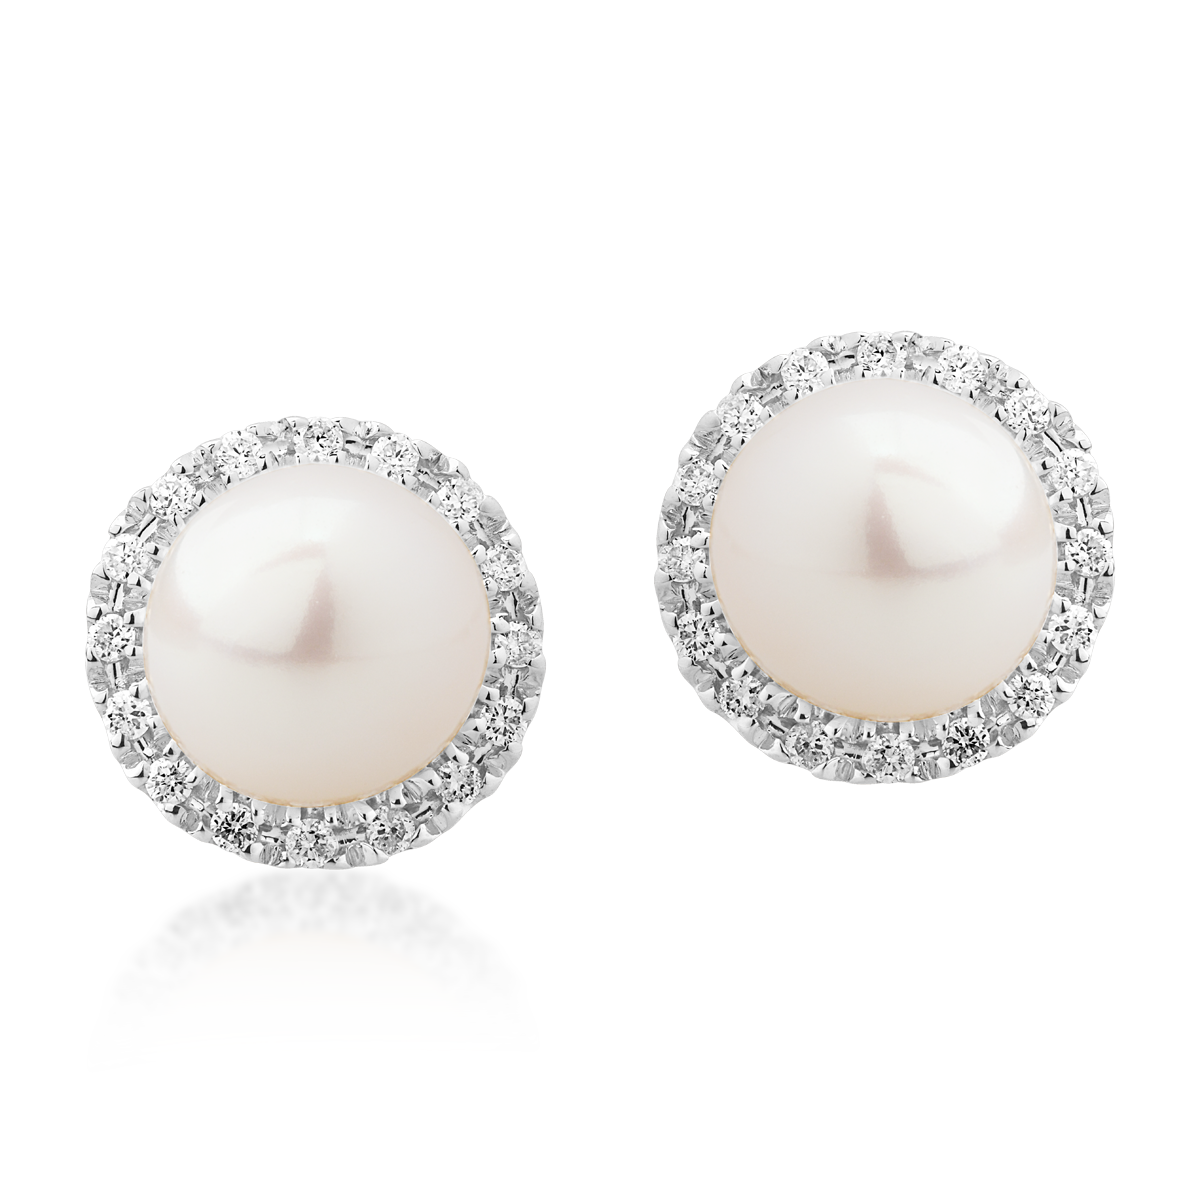 White gold earrings with 0.093ct diamonds and fresh water pearls